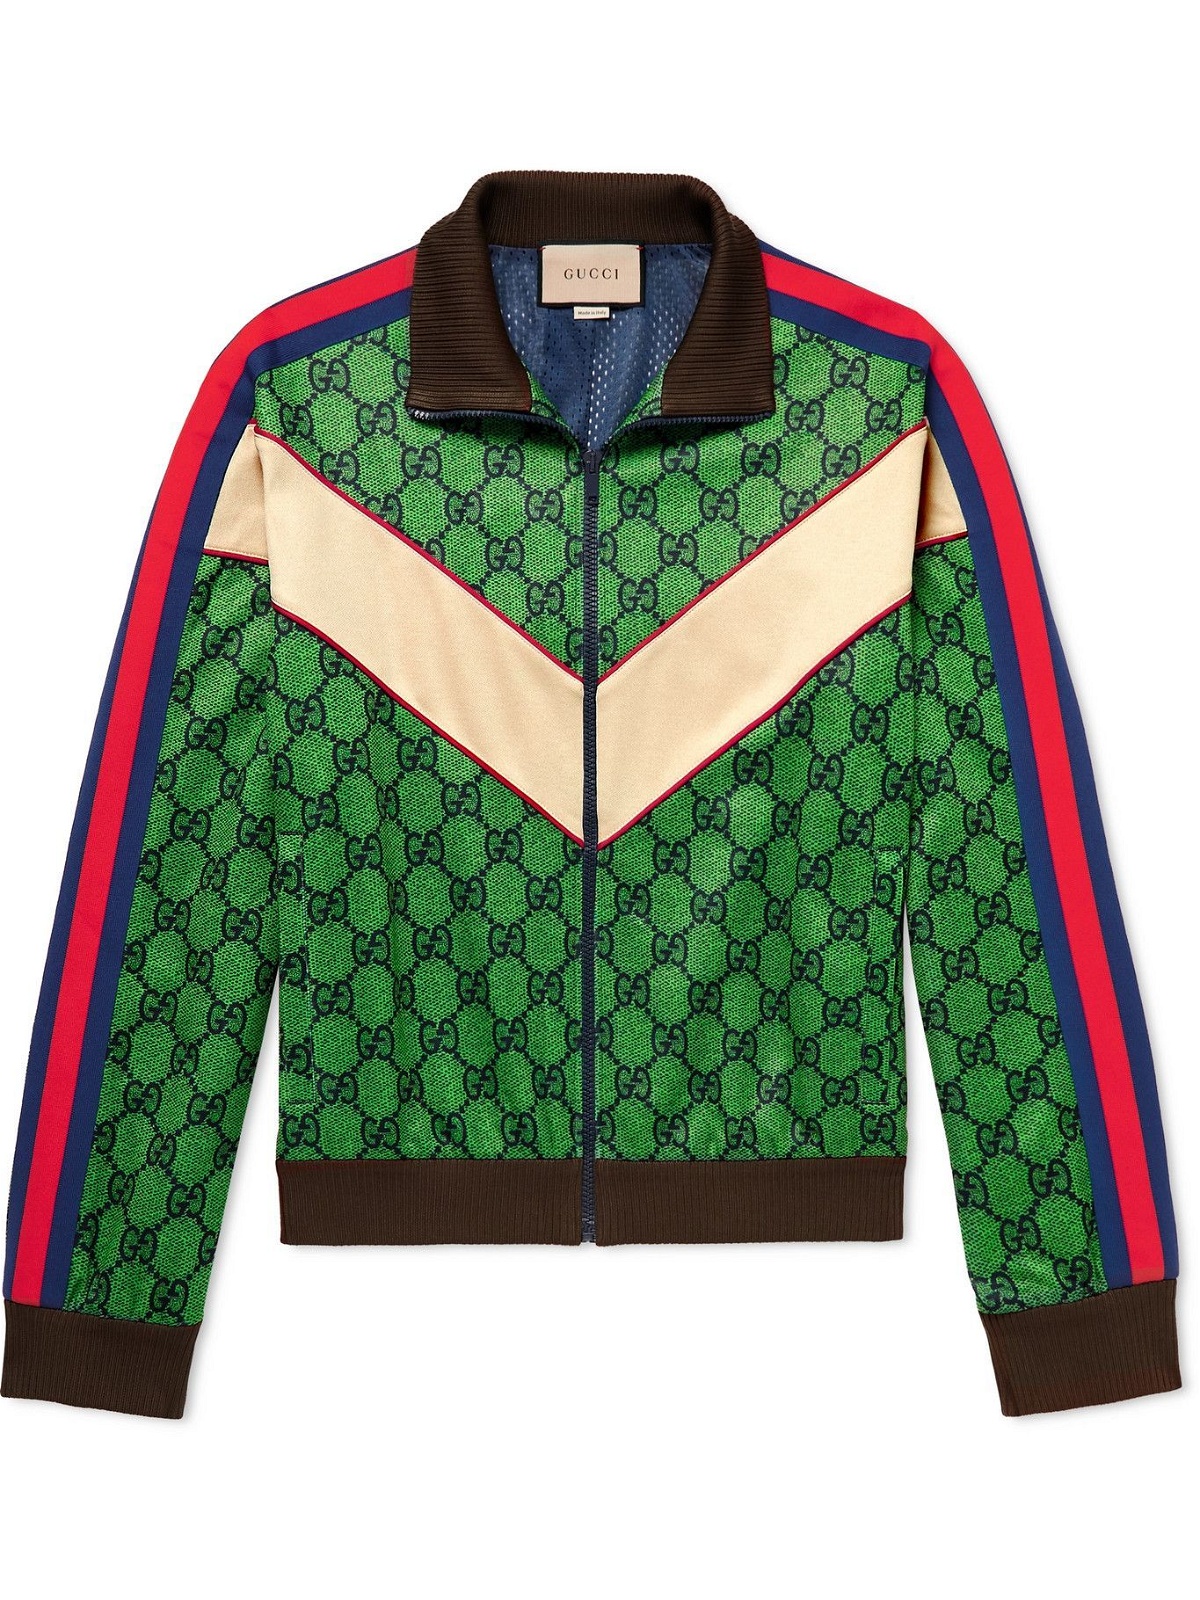 GUCCI - Striped Webbing-Trimmed Monogrammed Tech-Jersey Track